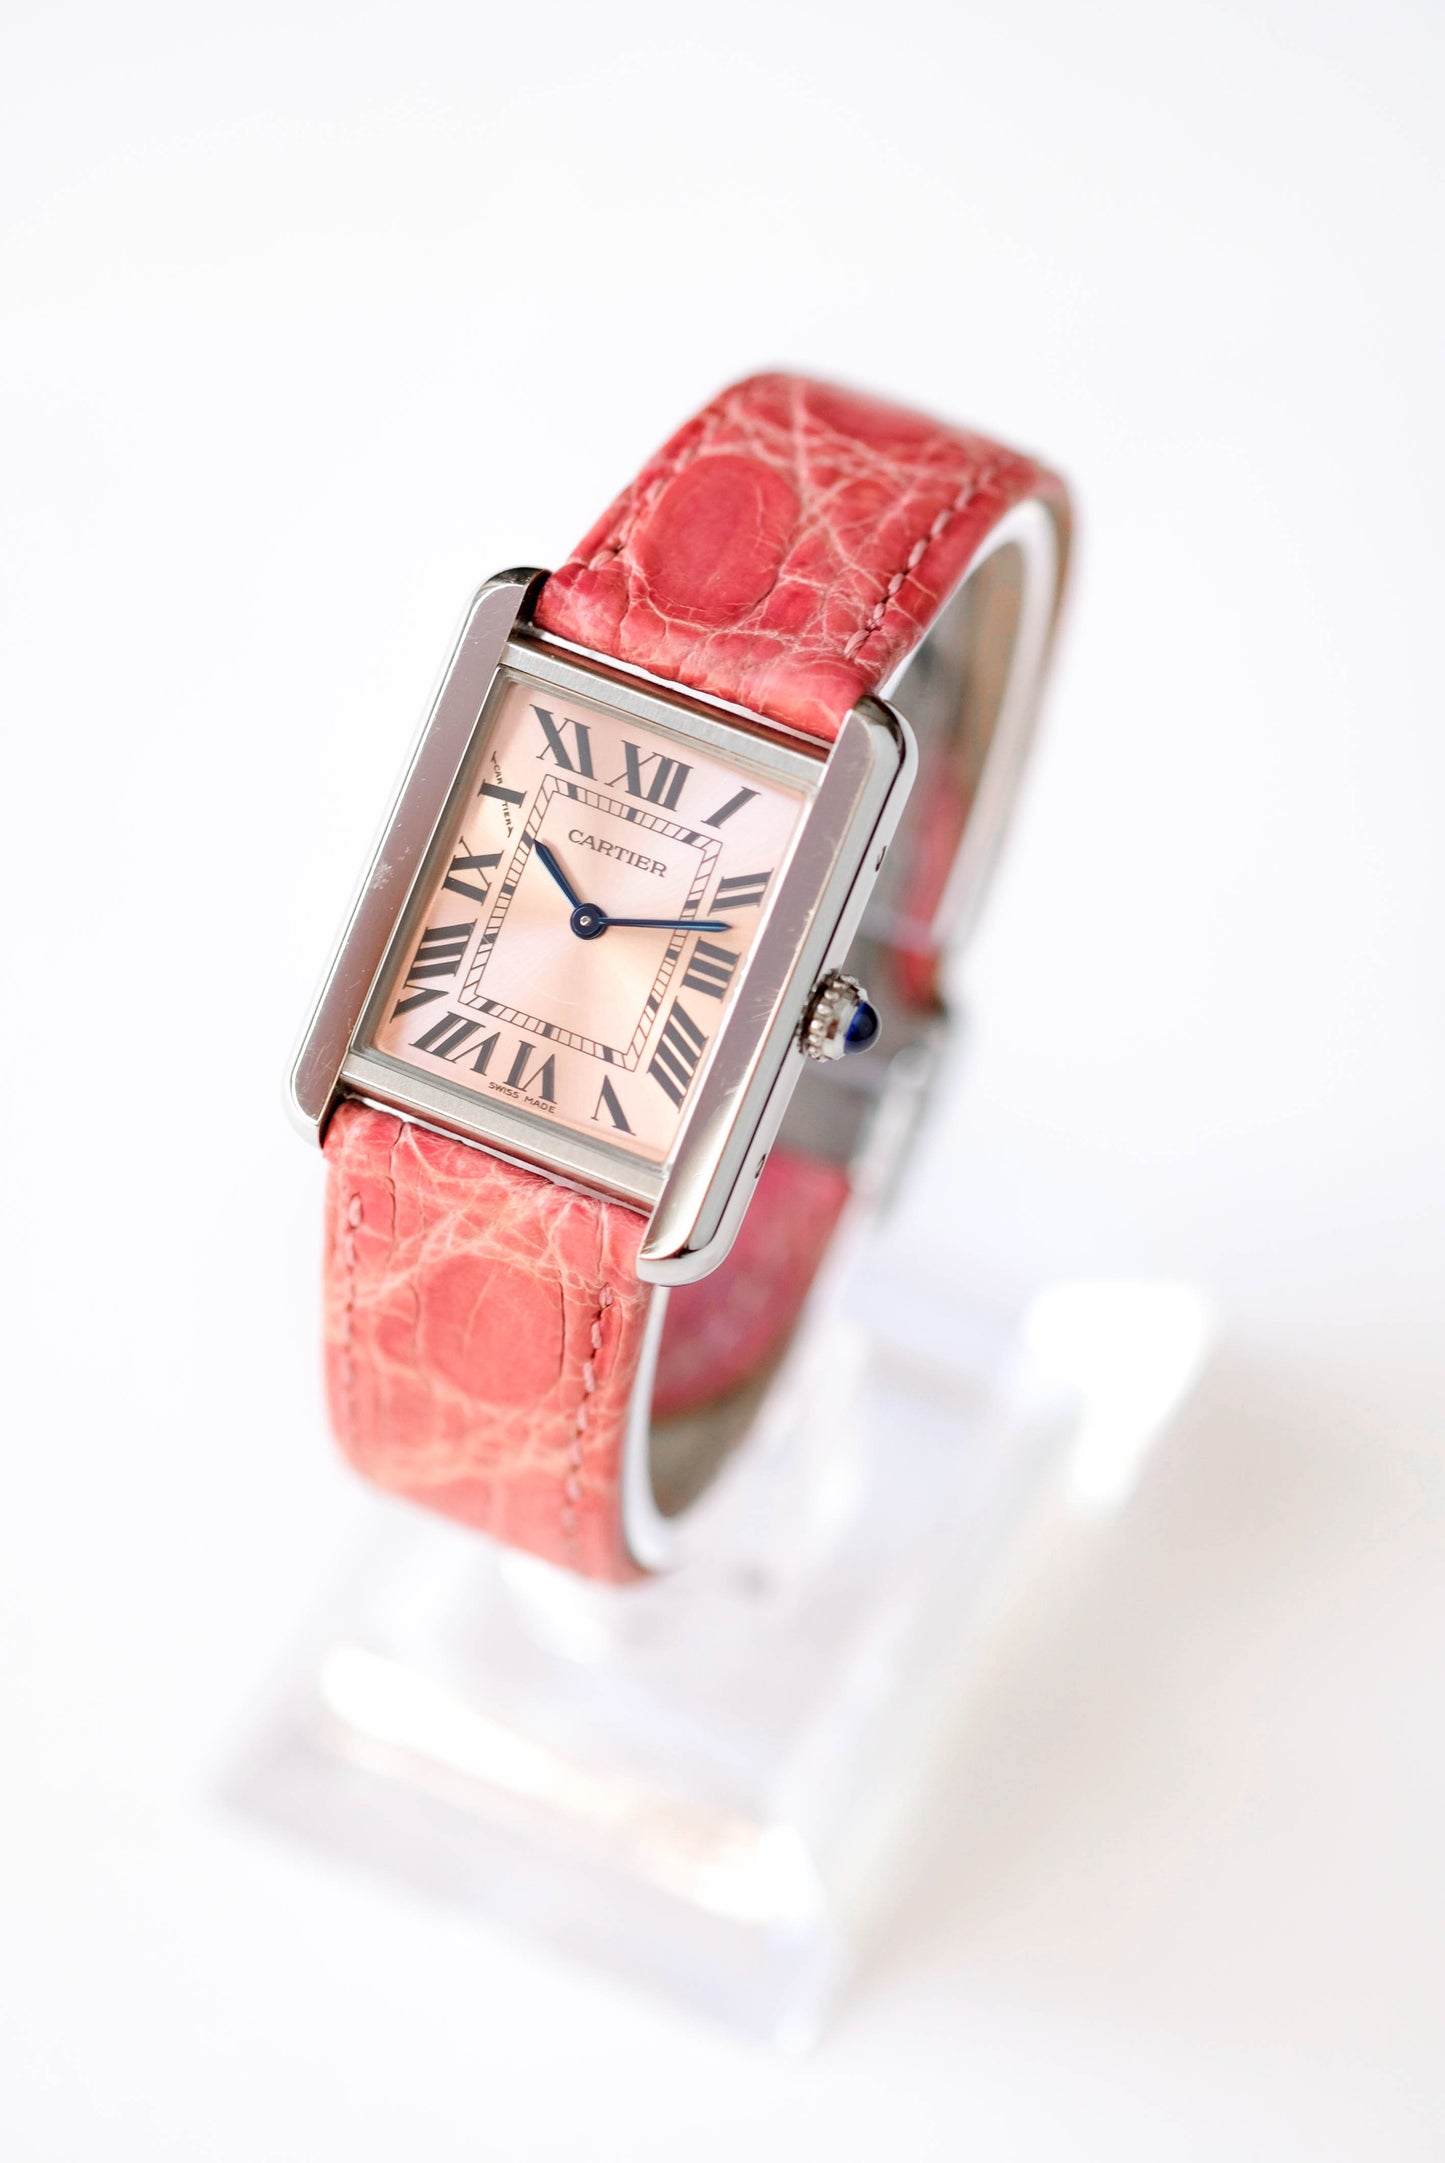 Cartier Tank Solo "pink" - 2011